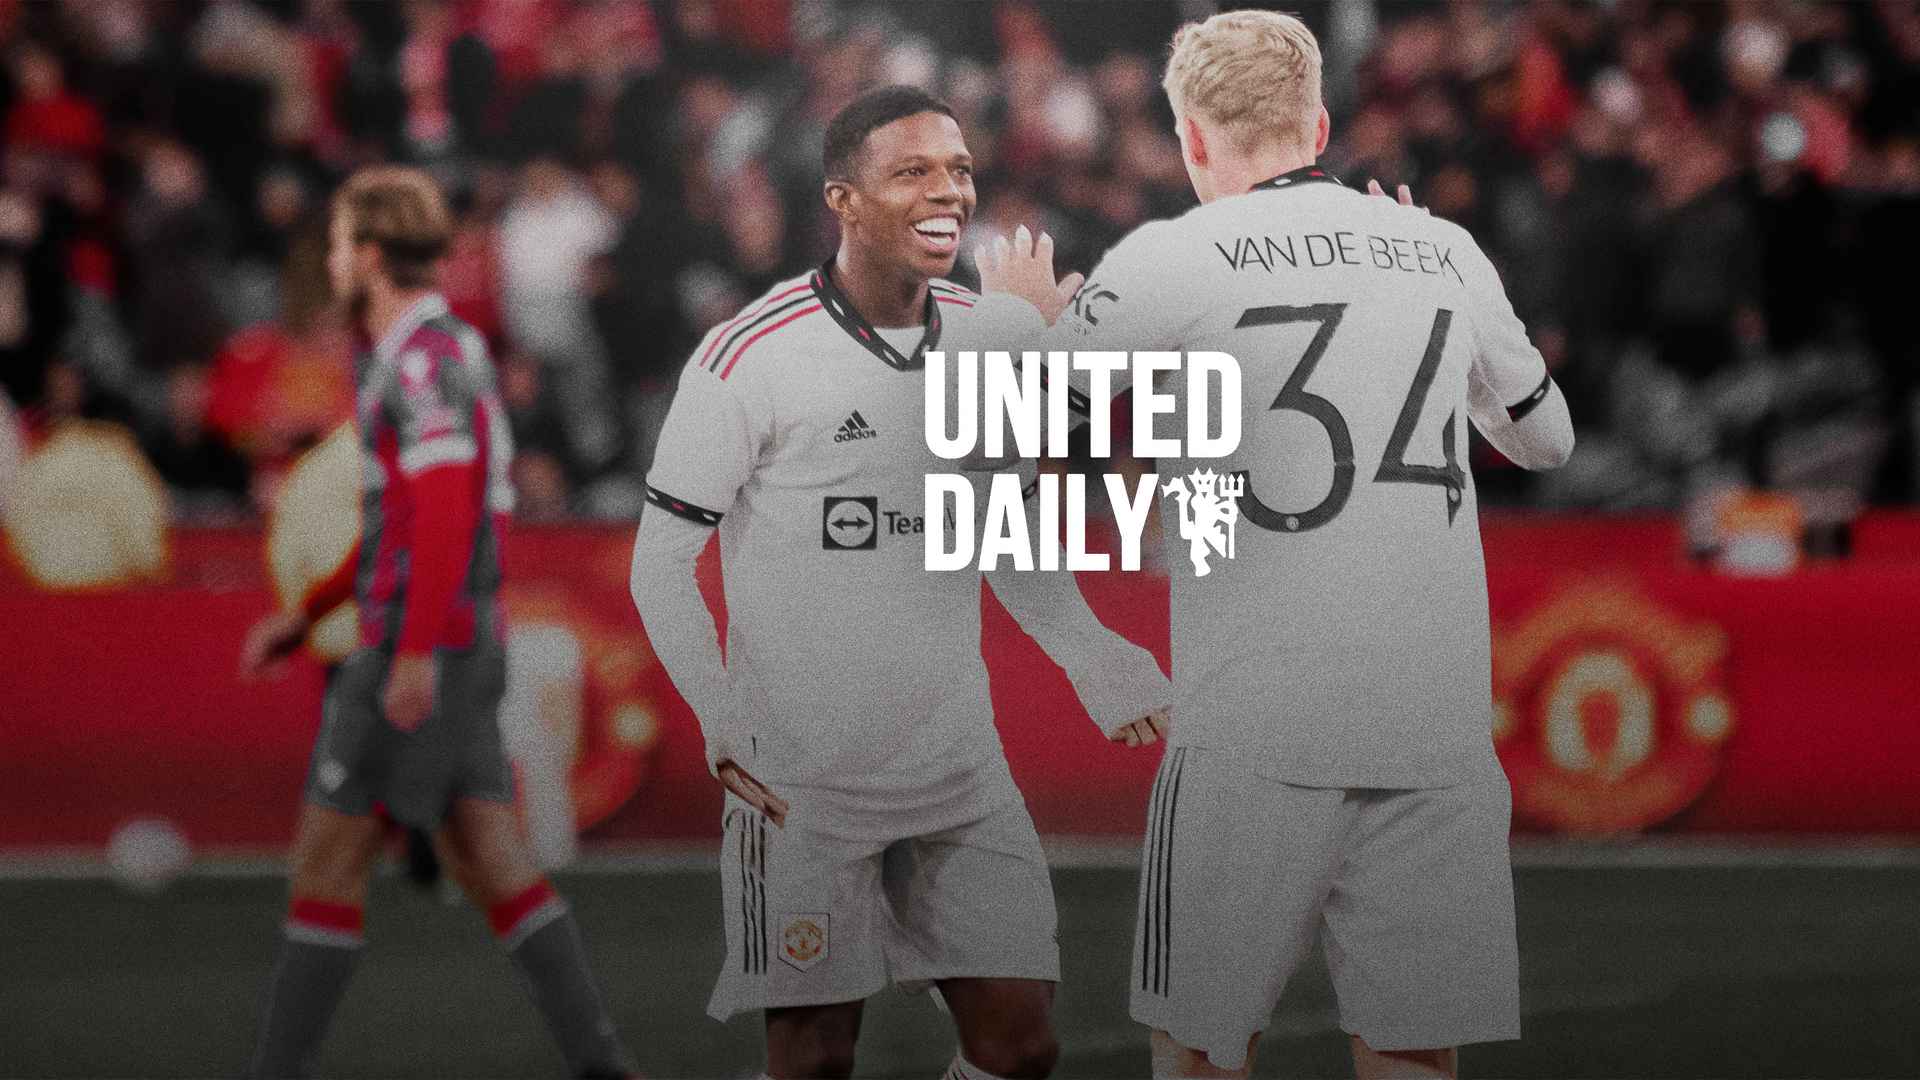 A double Dutch United Daily